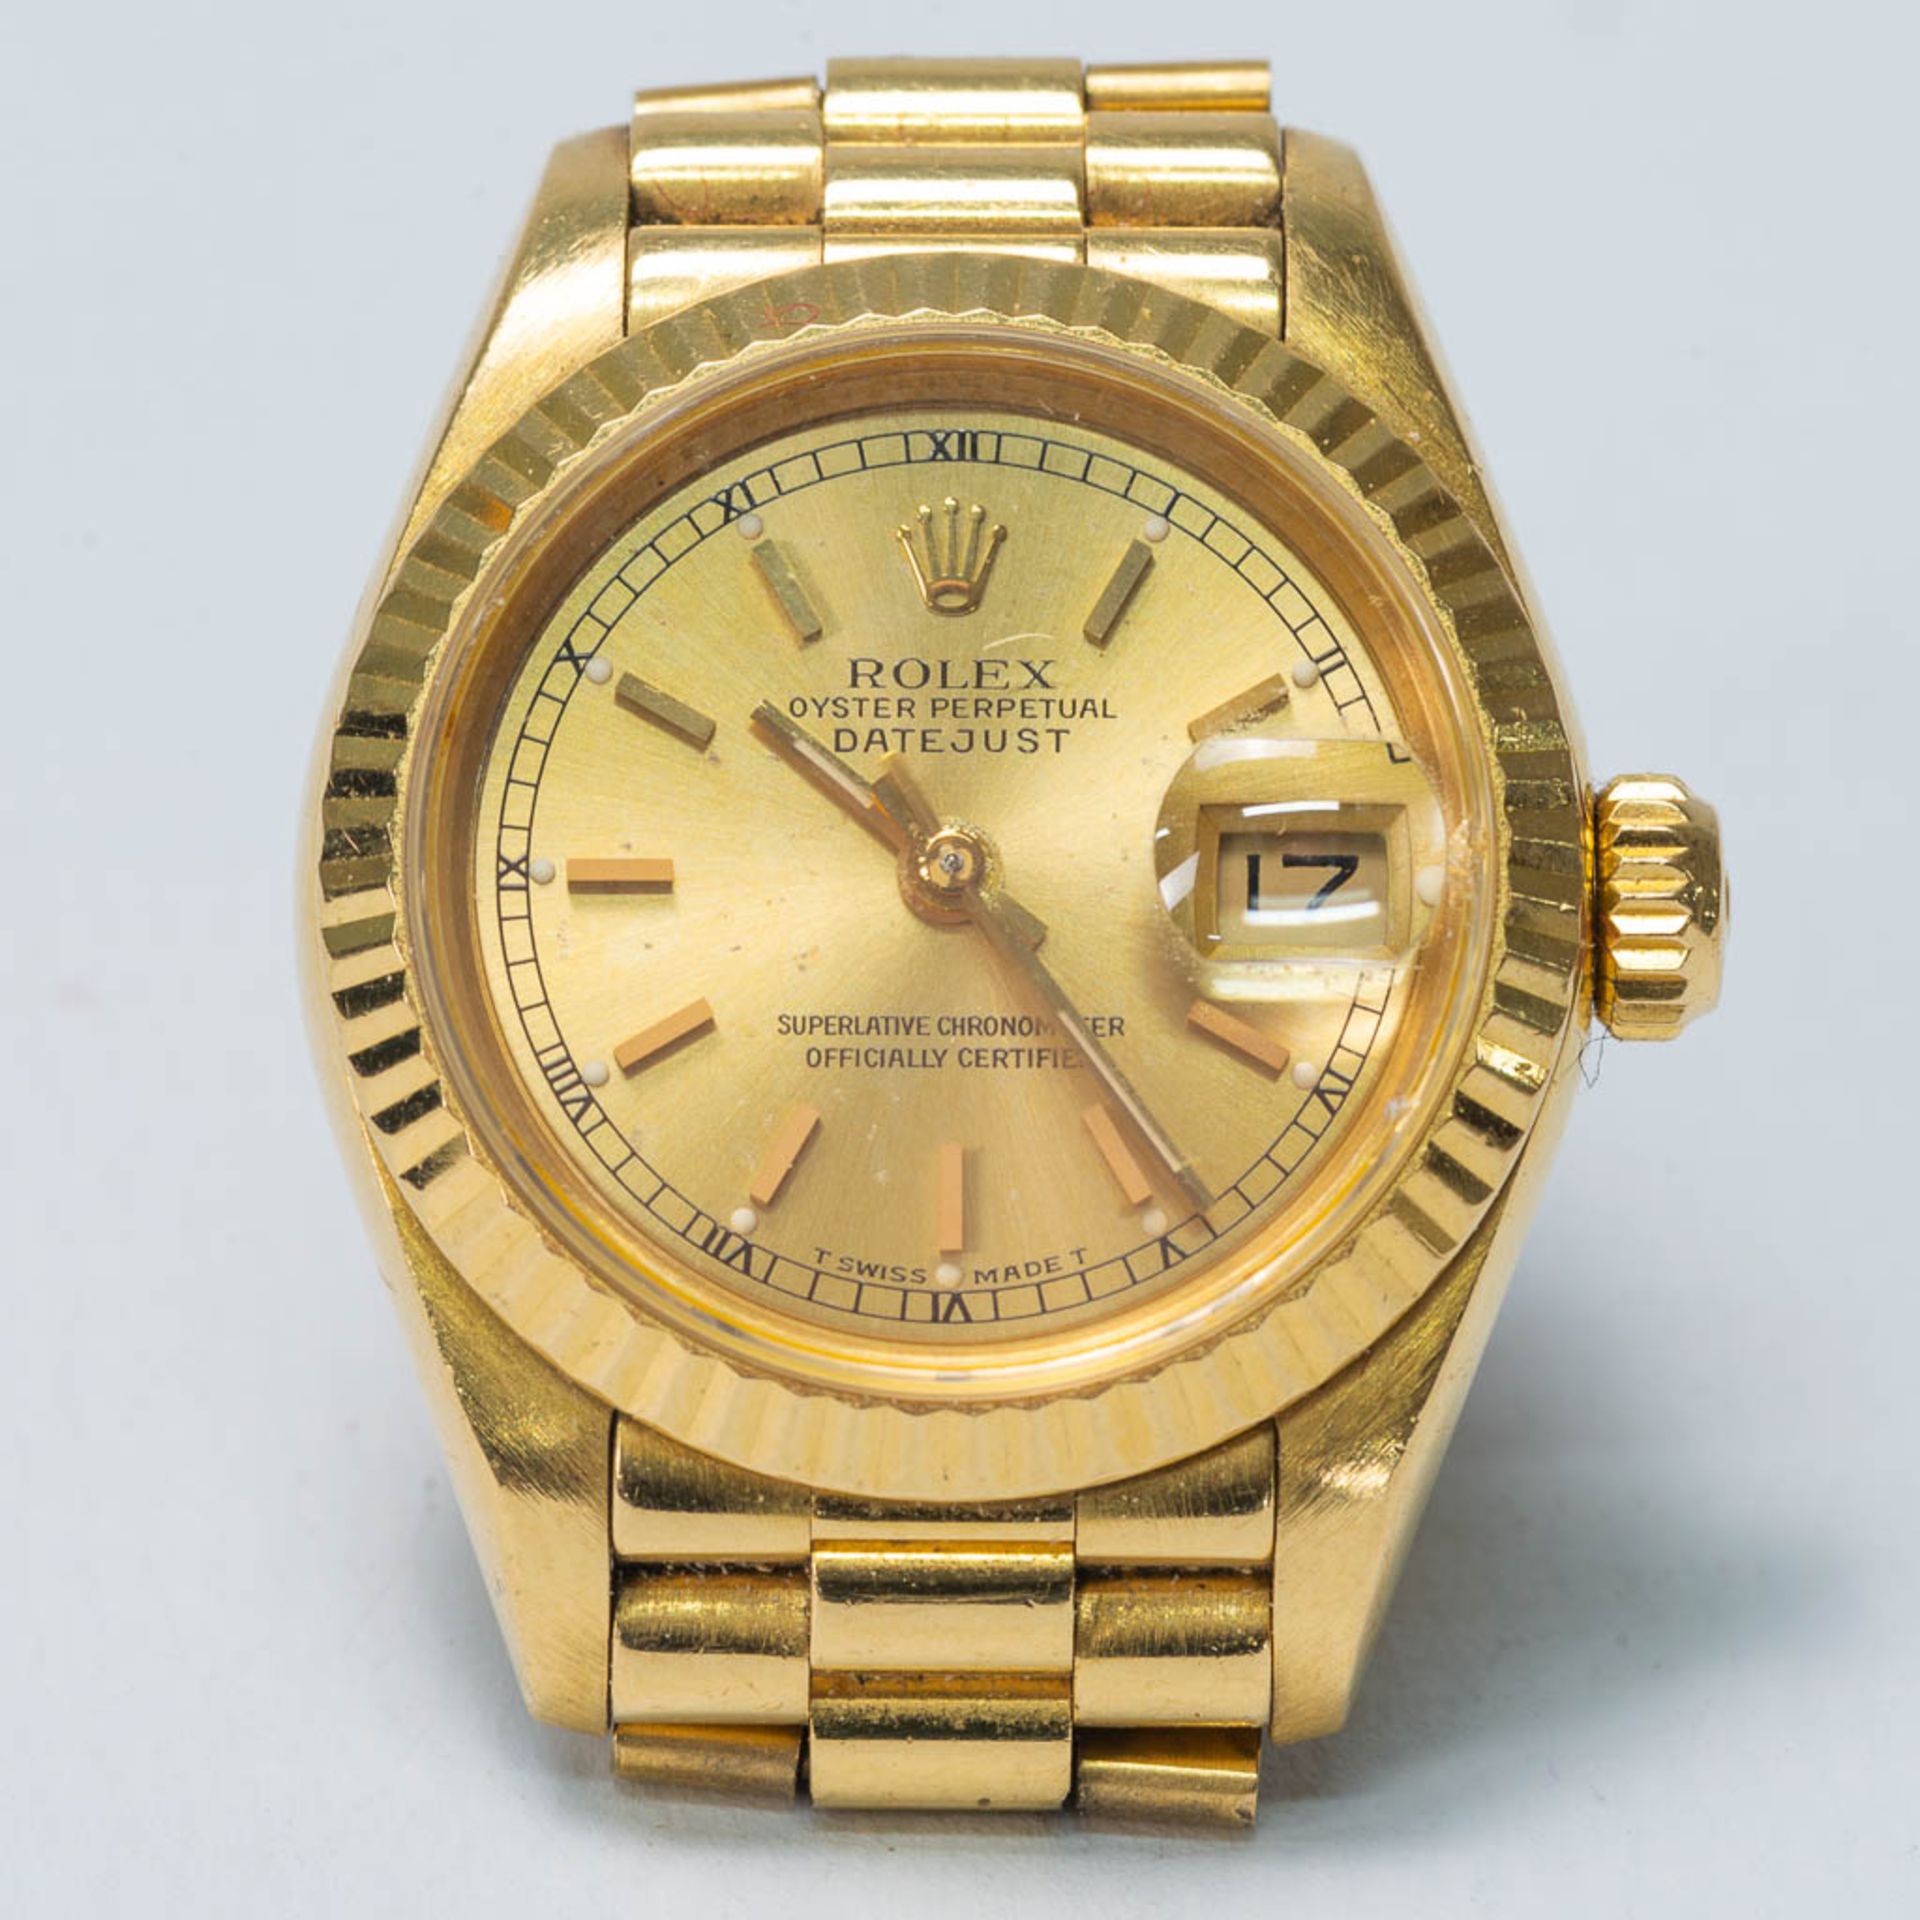 A Rolex Datejust ladies model 69178 made of 18kt gold with bracelet, original box and papers. 26mm.